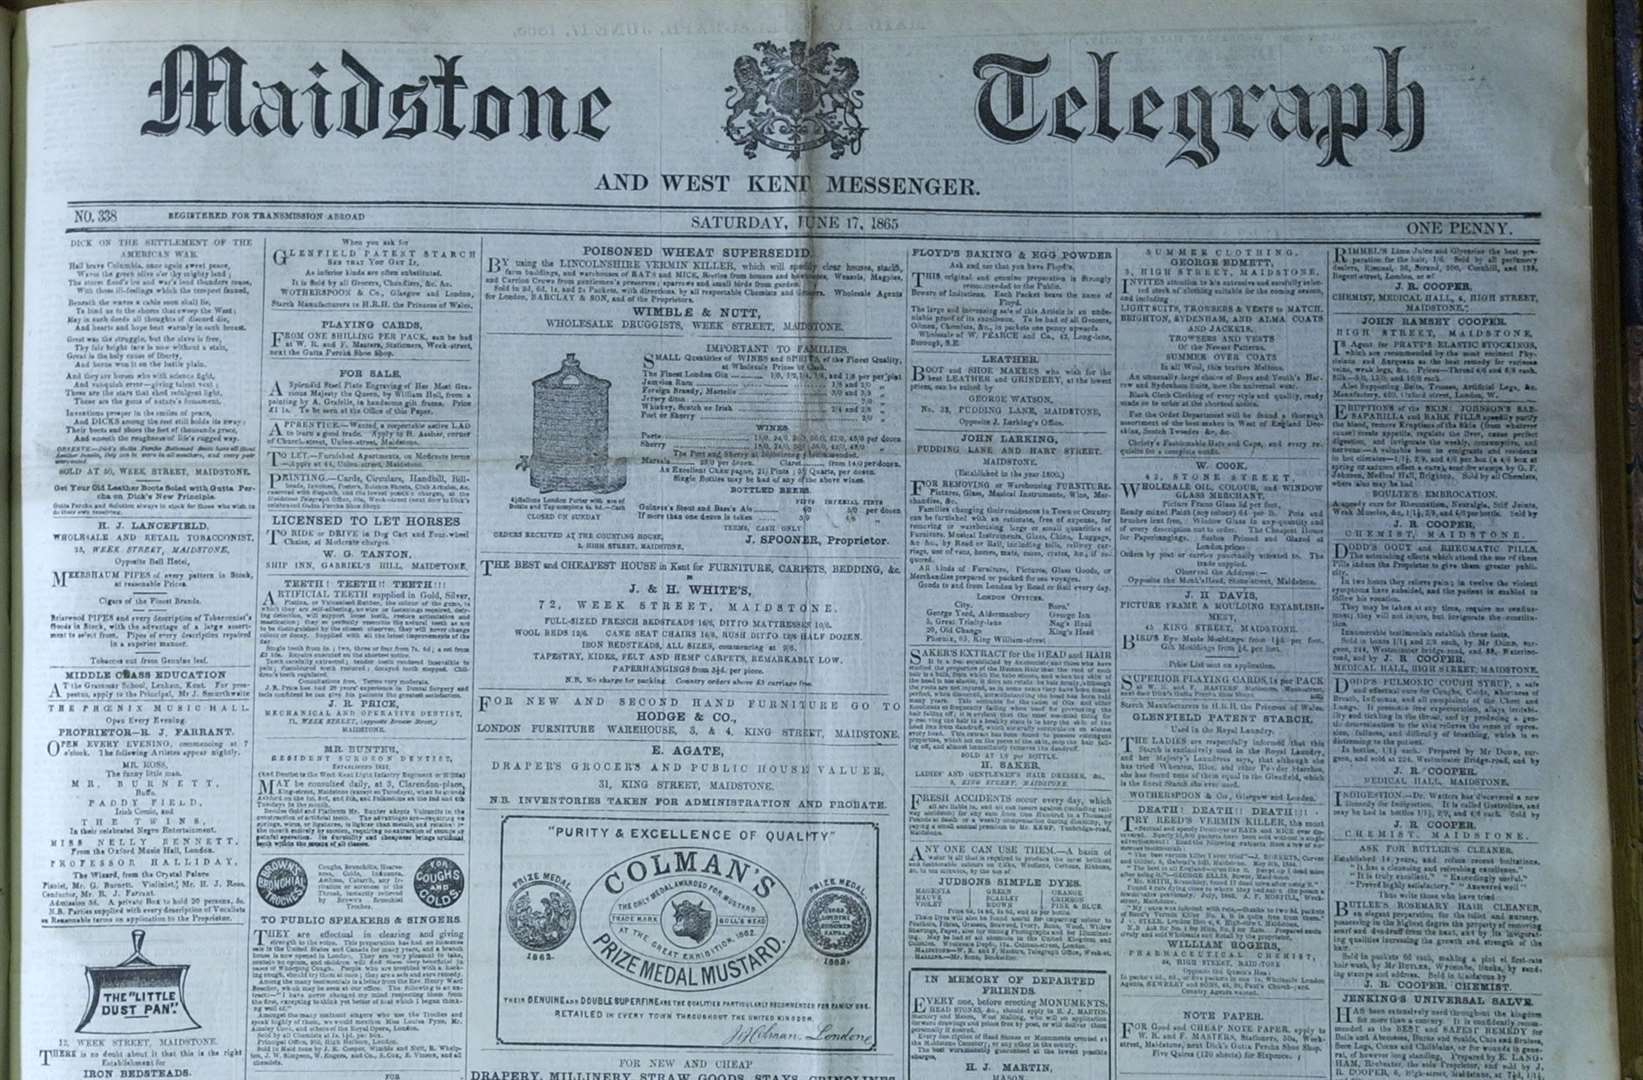 The Maidstone Telegraph reported on the 1865 Staplehurst railway crash which Charles Dickens was involved in